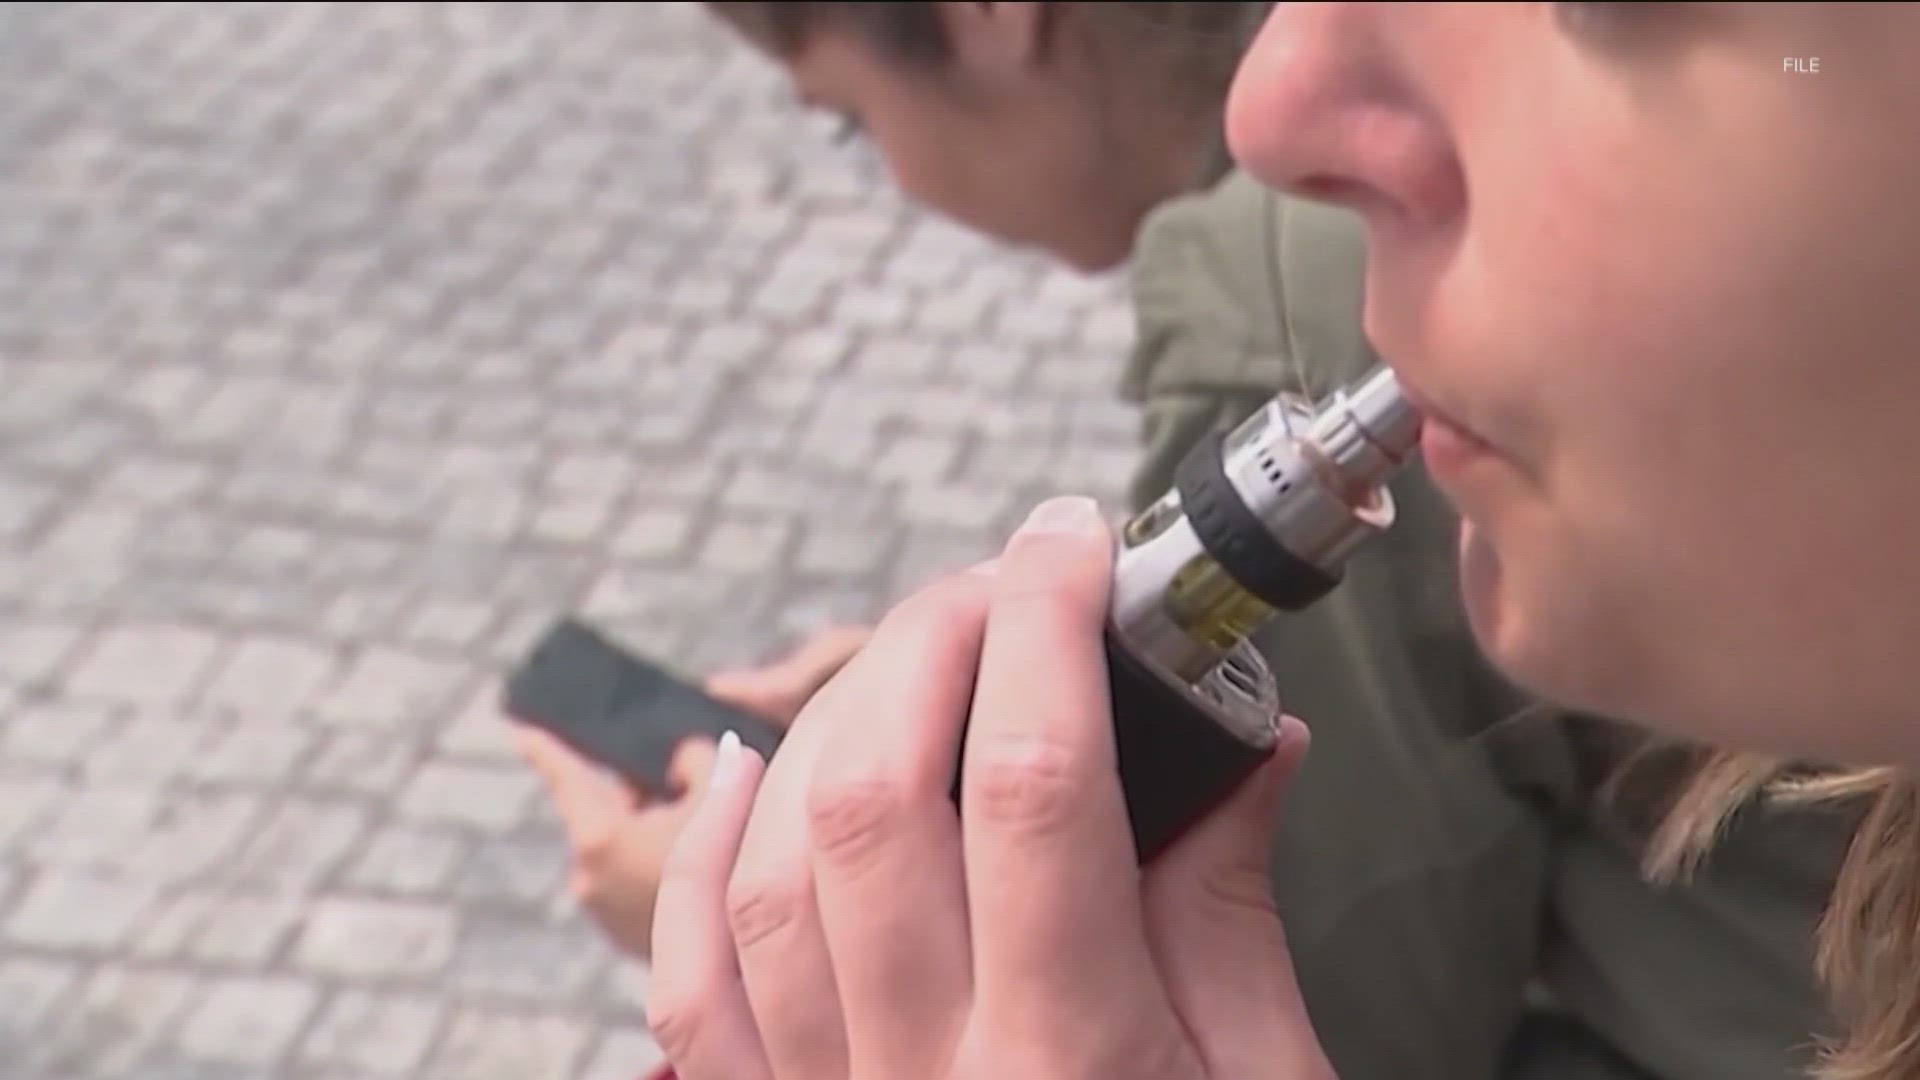 Austin ISD is changing how it disciplines students who bring e-cigarettes to school.